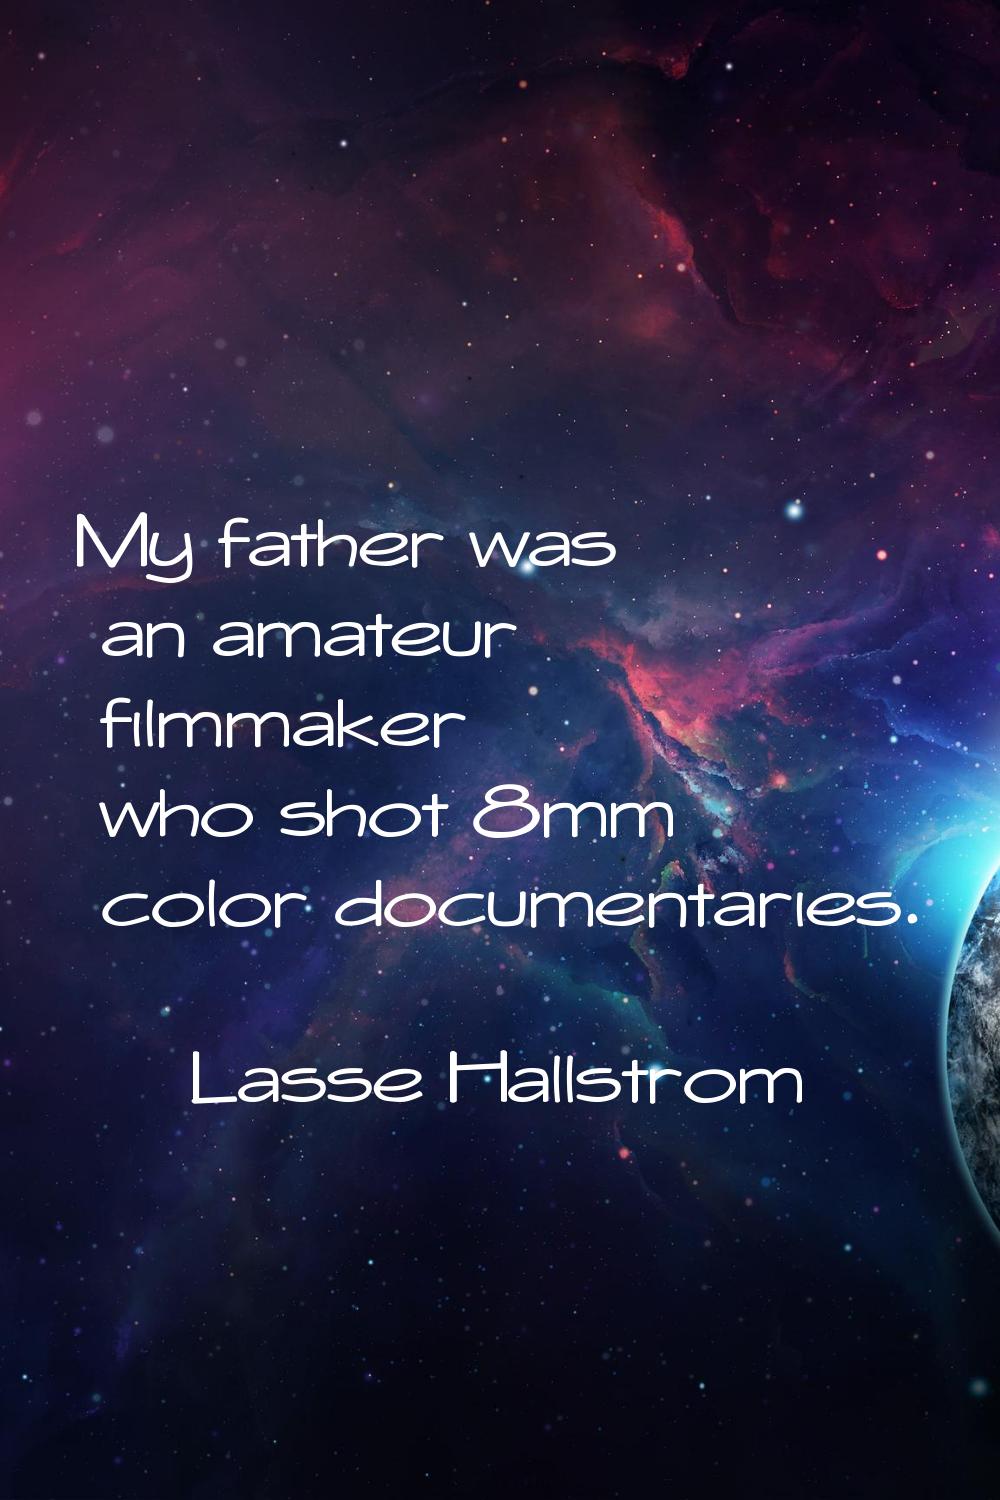 My father was an amateur filmmaker who shot 8mm color documentaries.